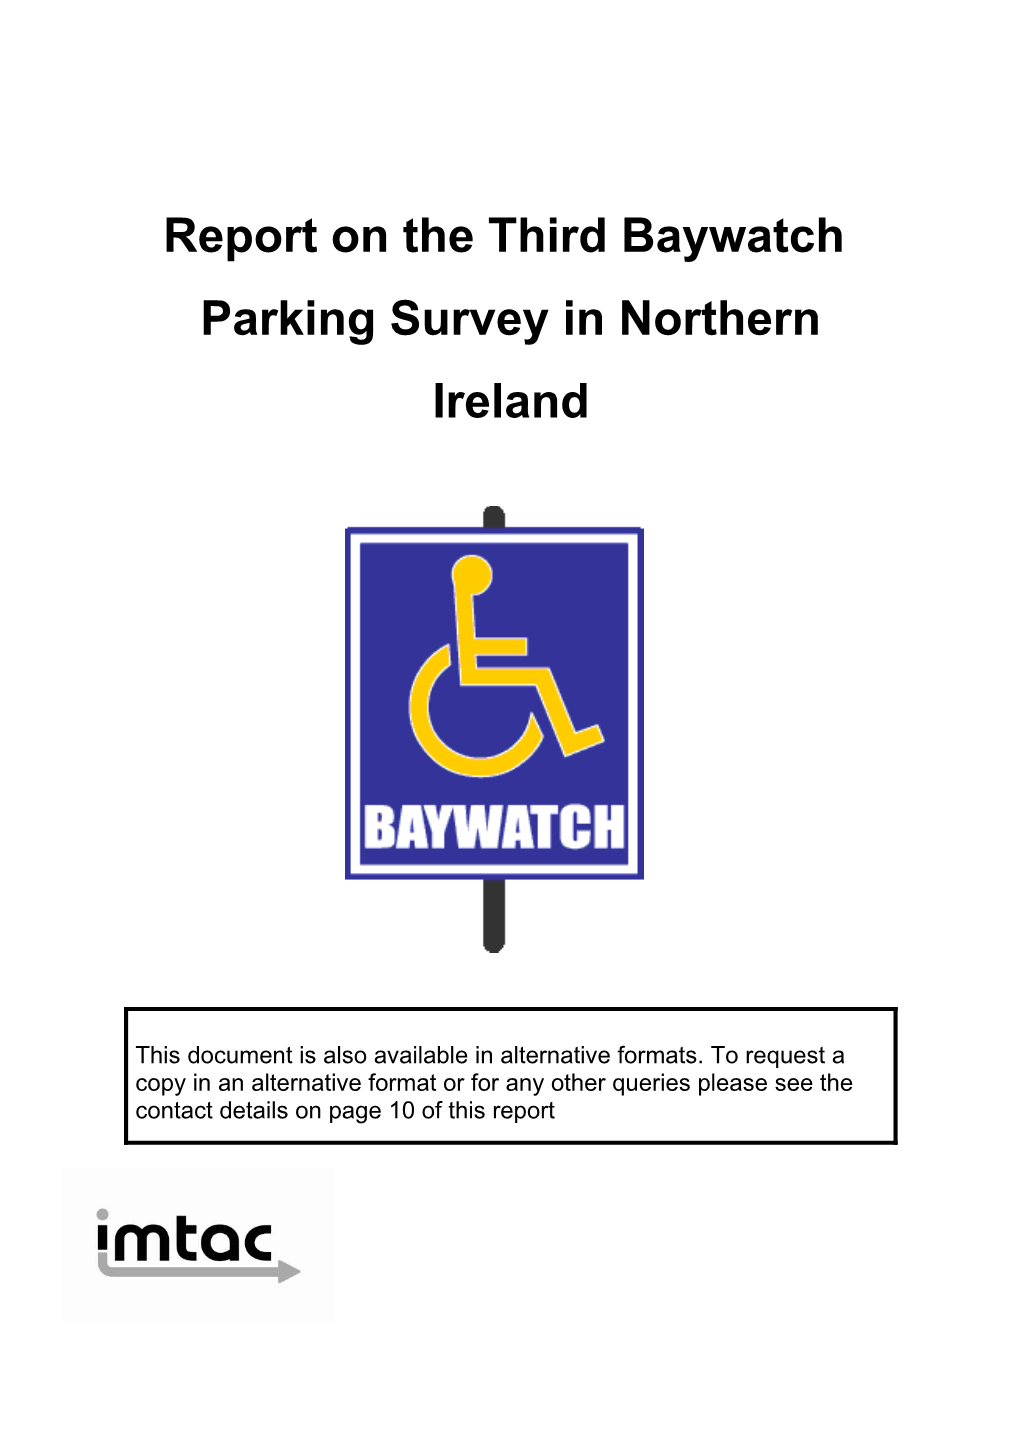 Report on the First Baywatch Parking Survey in Northern Ireland